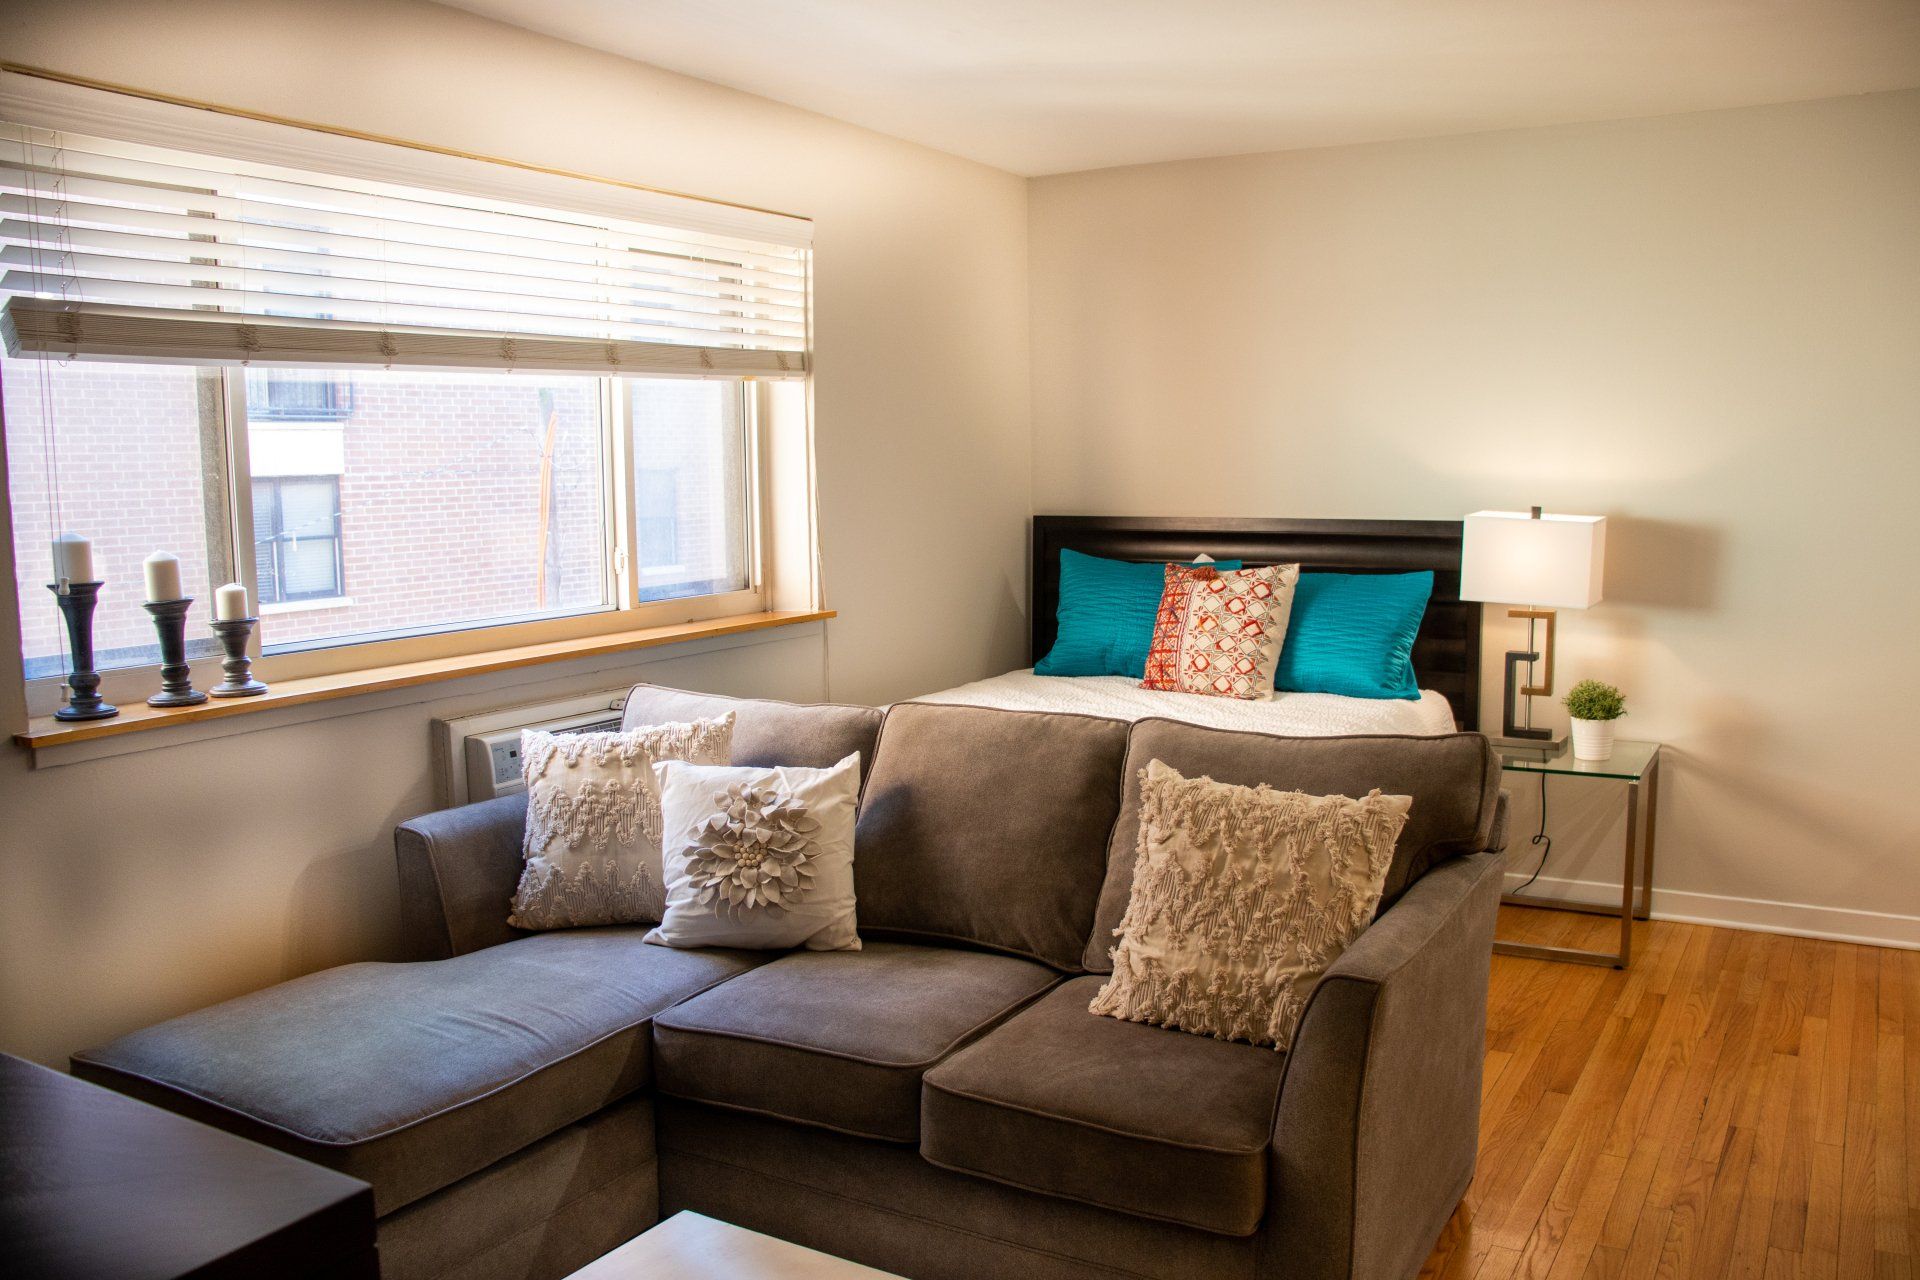 A living room with a couch, bed, and window at Reside on Morse.